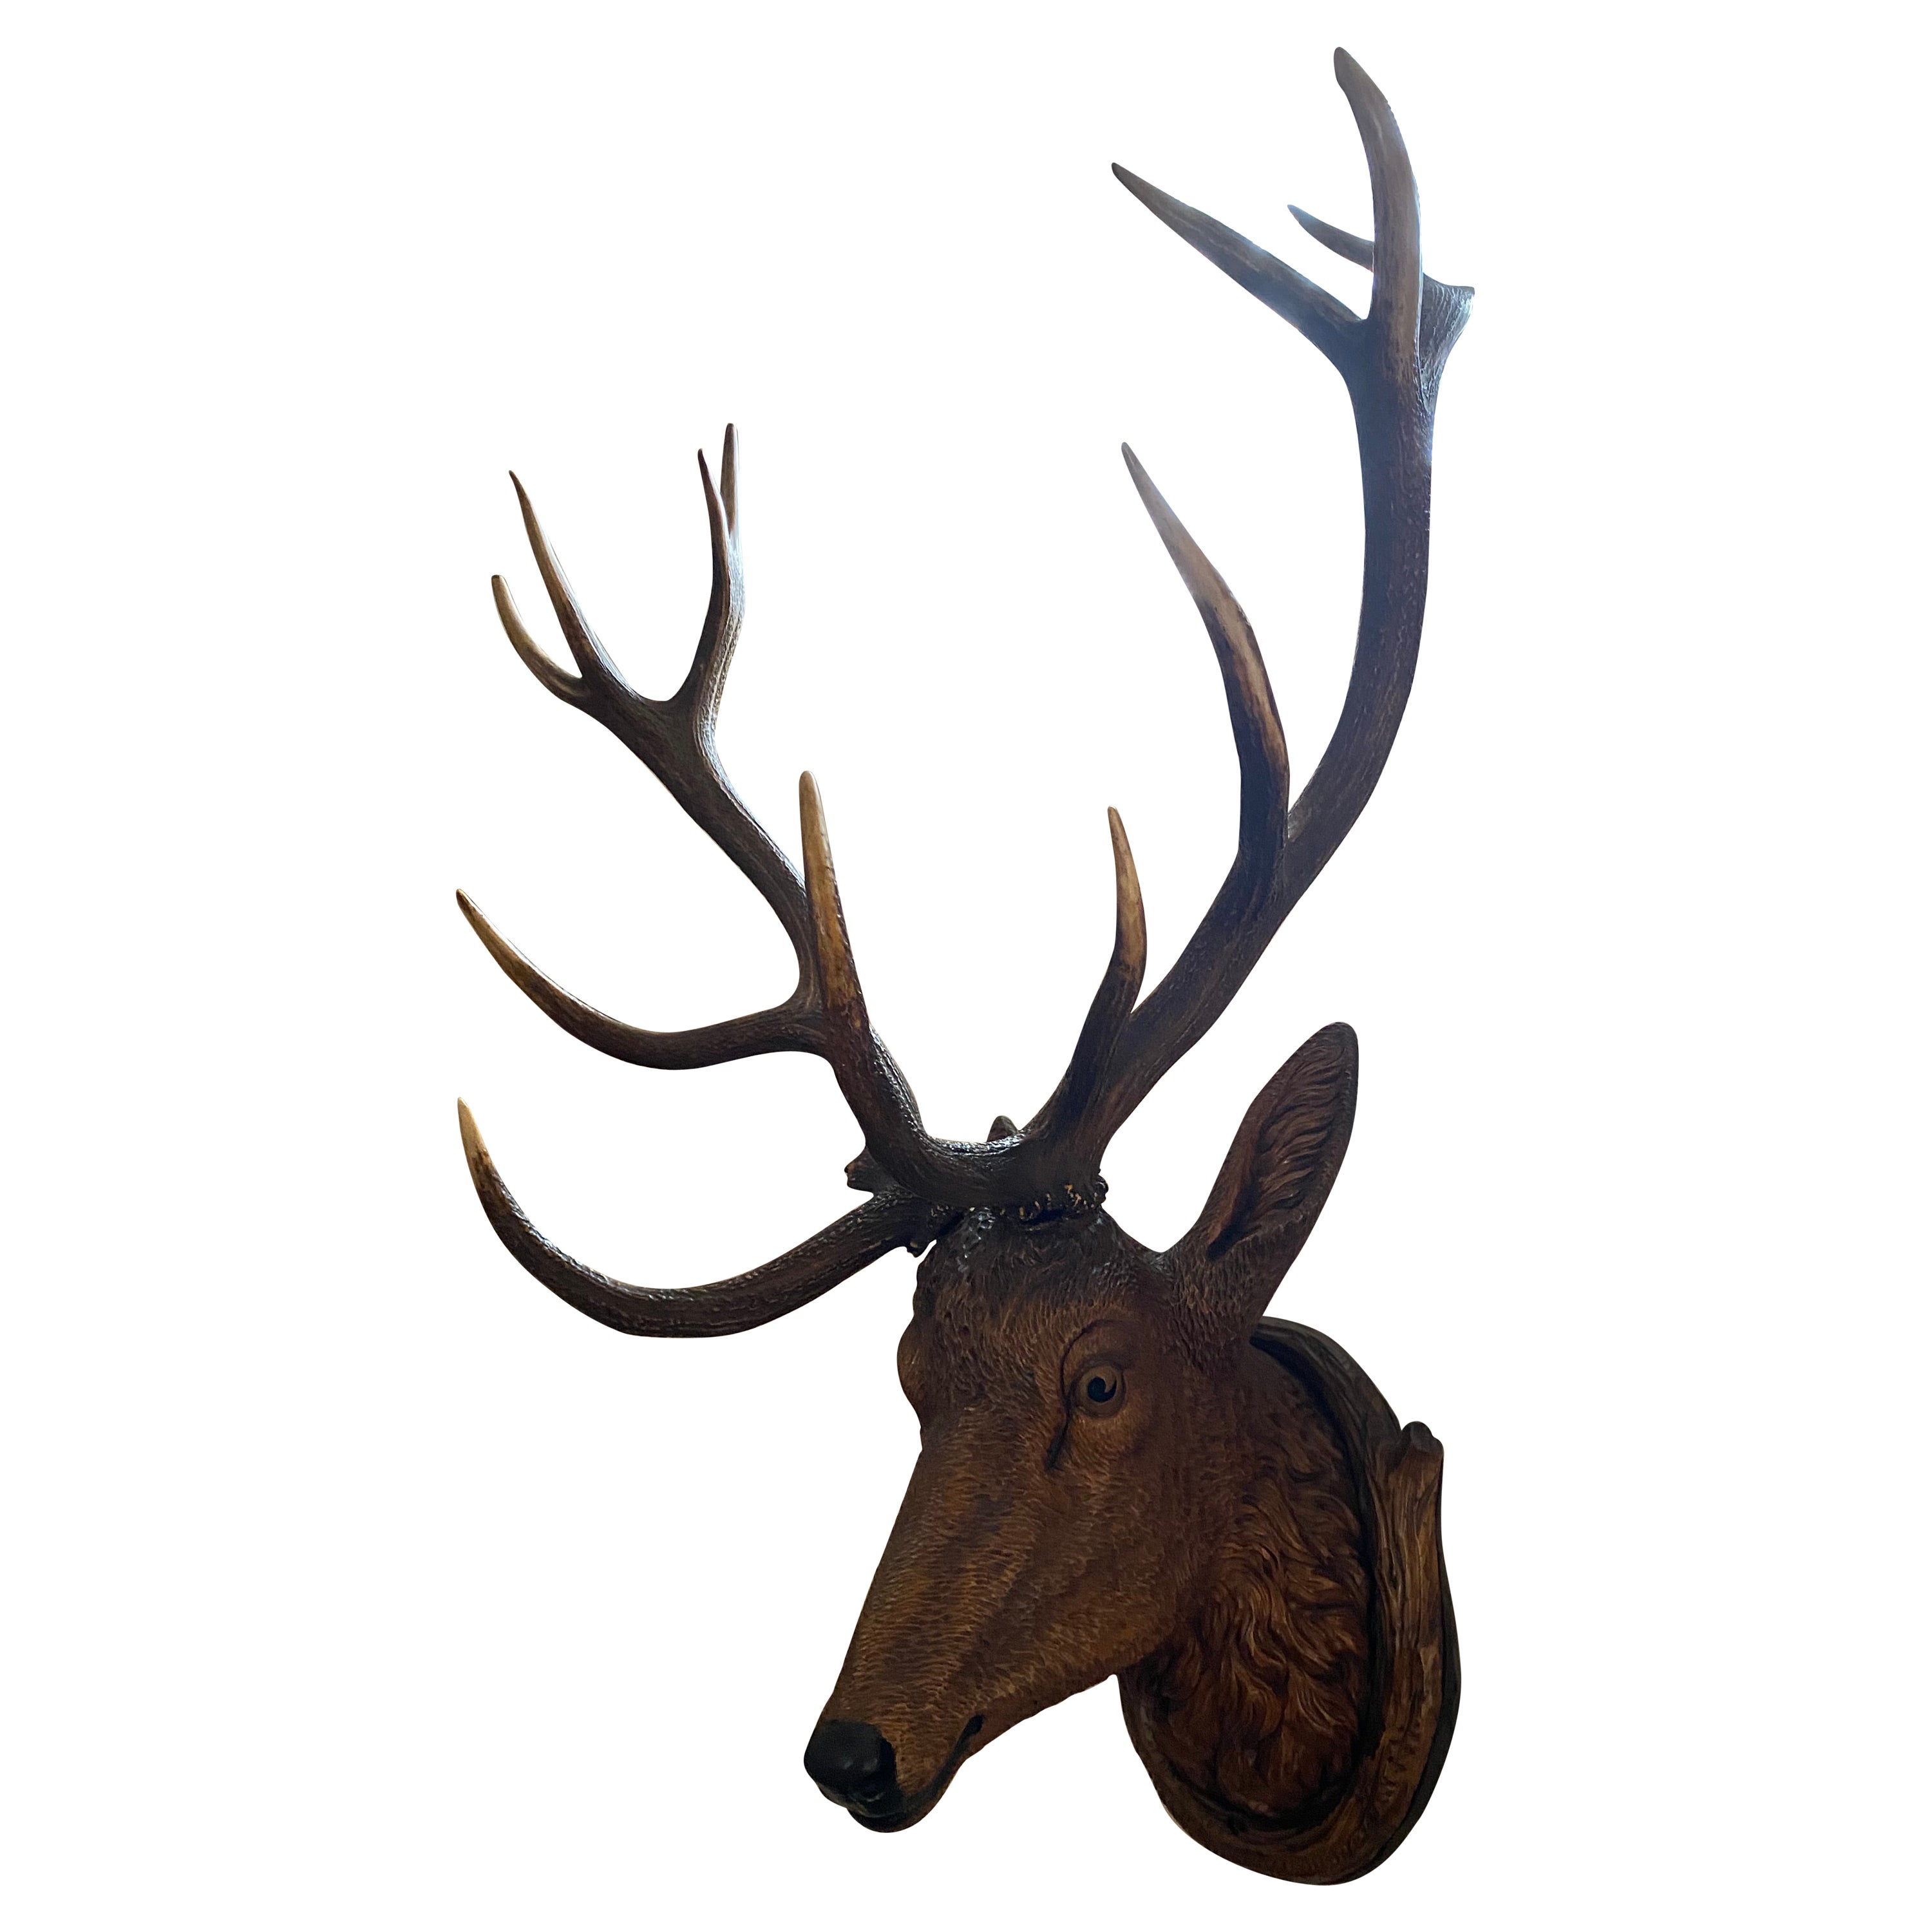 Stately Carved Wood Black Forest Deer Head with Real Antler Mounts, Great Scale